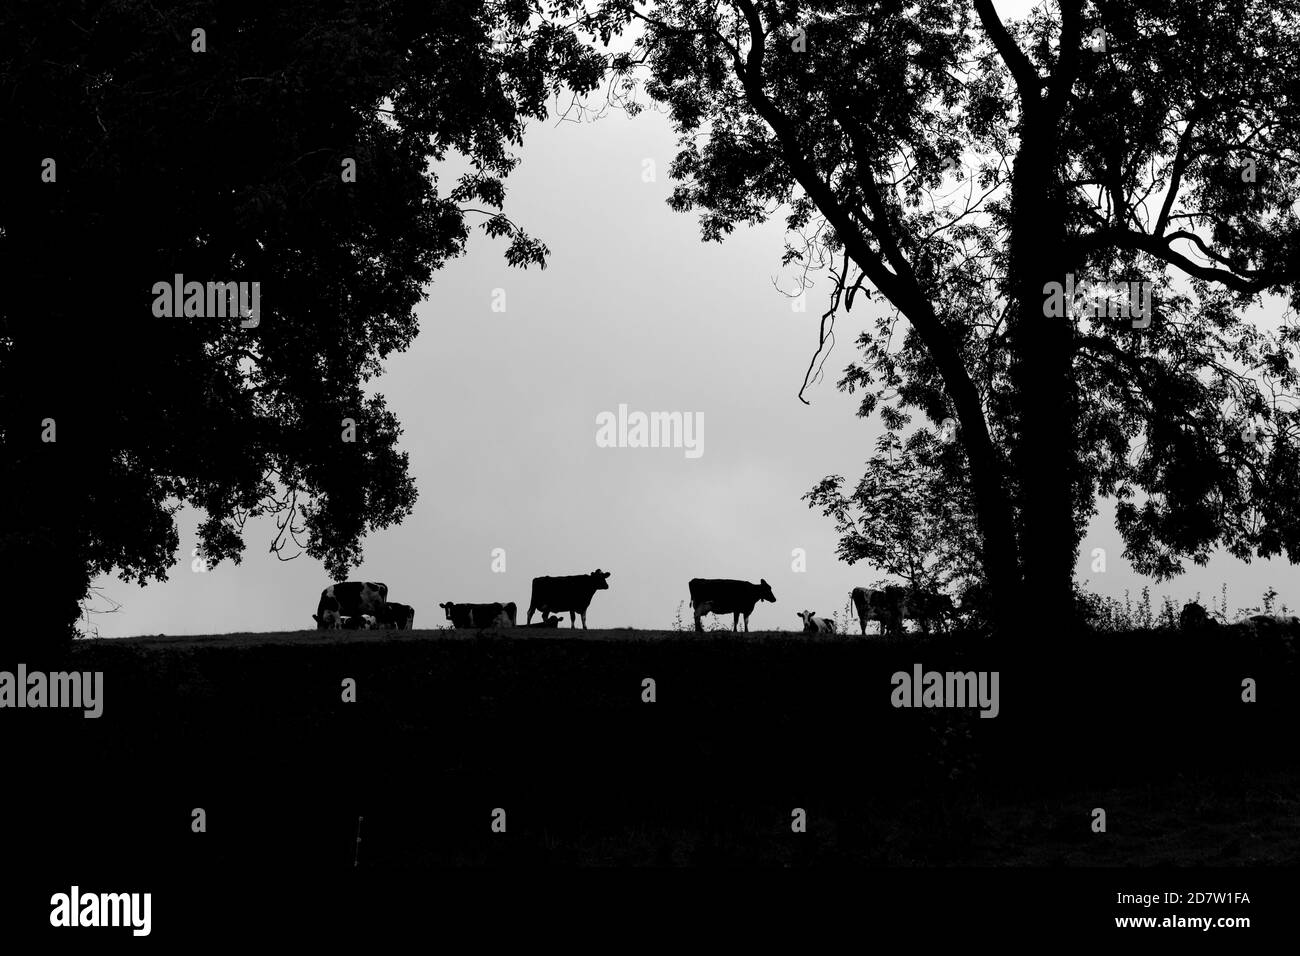 Black and white image of field with grazing cattle. Stock Photo